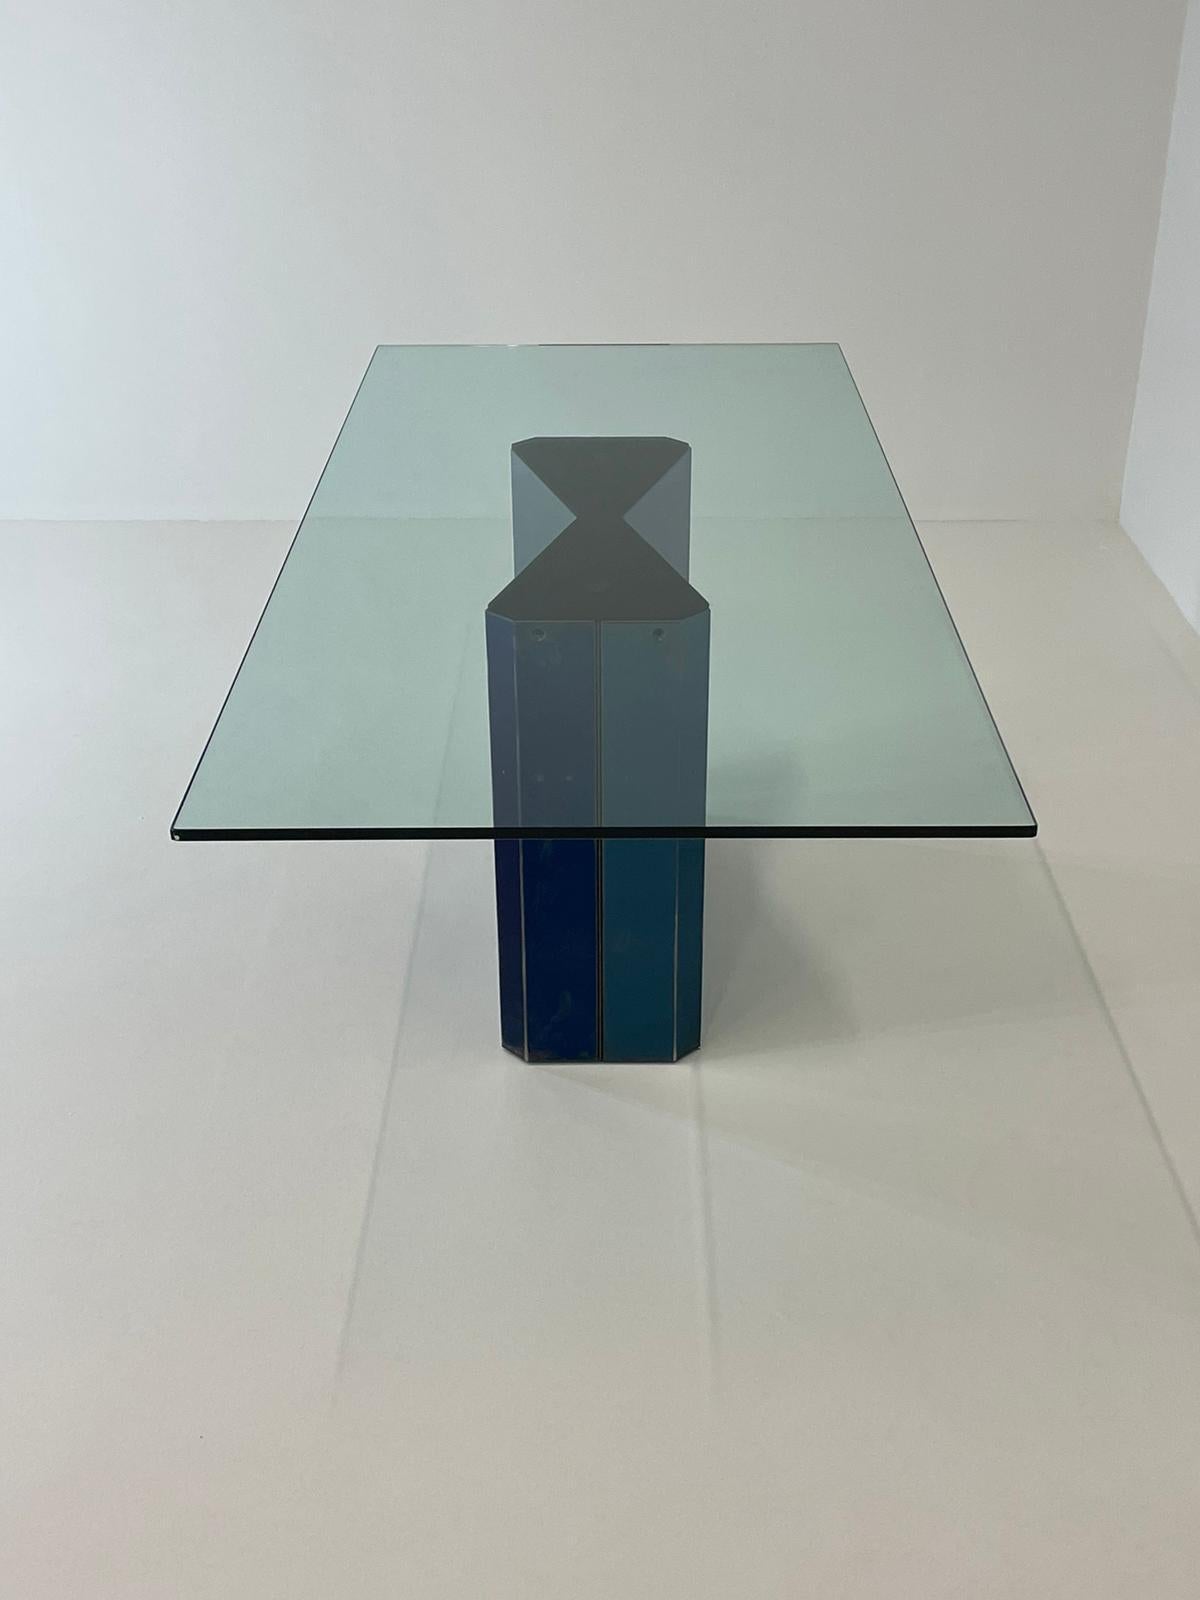 Afra & Tobia Scarpa for B&B Italia, 'Polygonon' model dining or meeting table, glass, electro-coated stainless steel, Italy, 1984
This stunning table designed by the Italian master duo Afra & Tobia Scarpa is rare and hard to find. 
The geometric